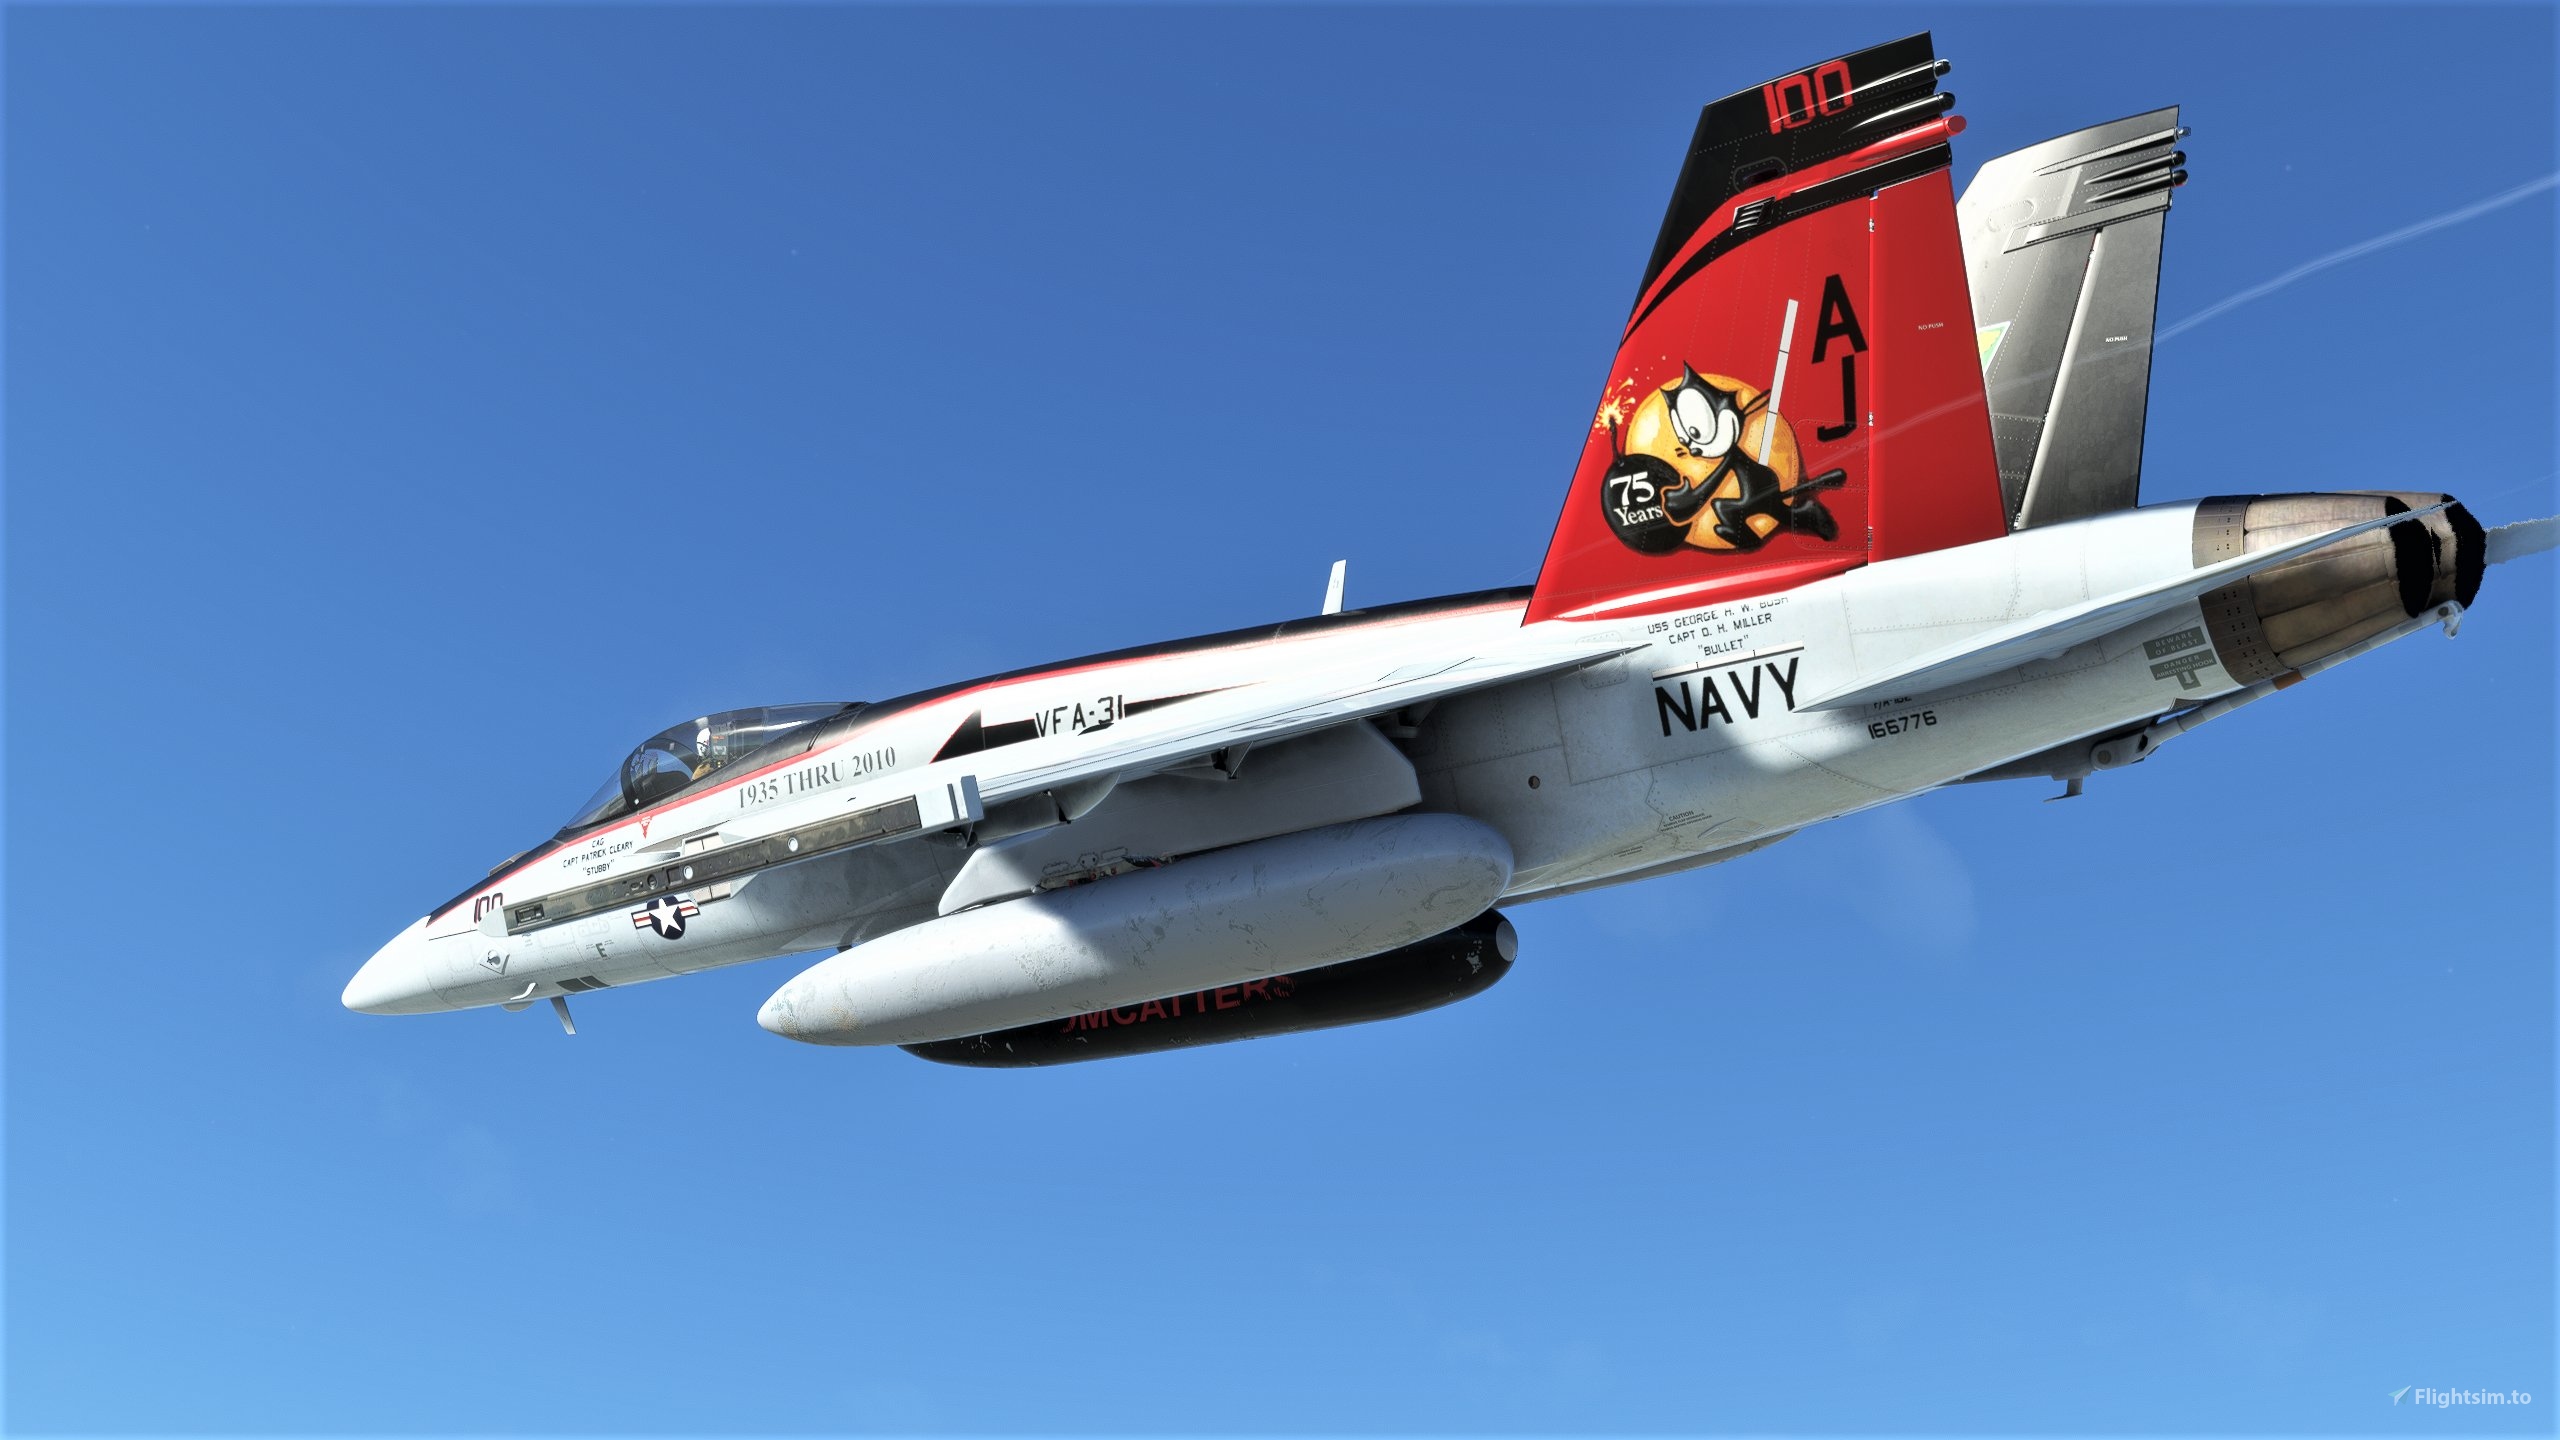 VFA-31 Tomcatters